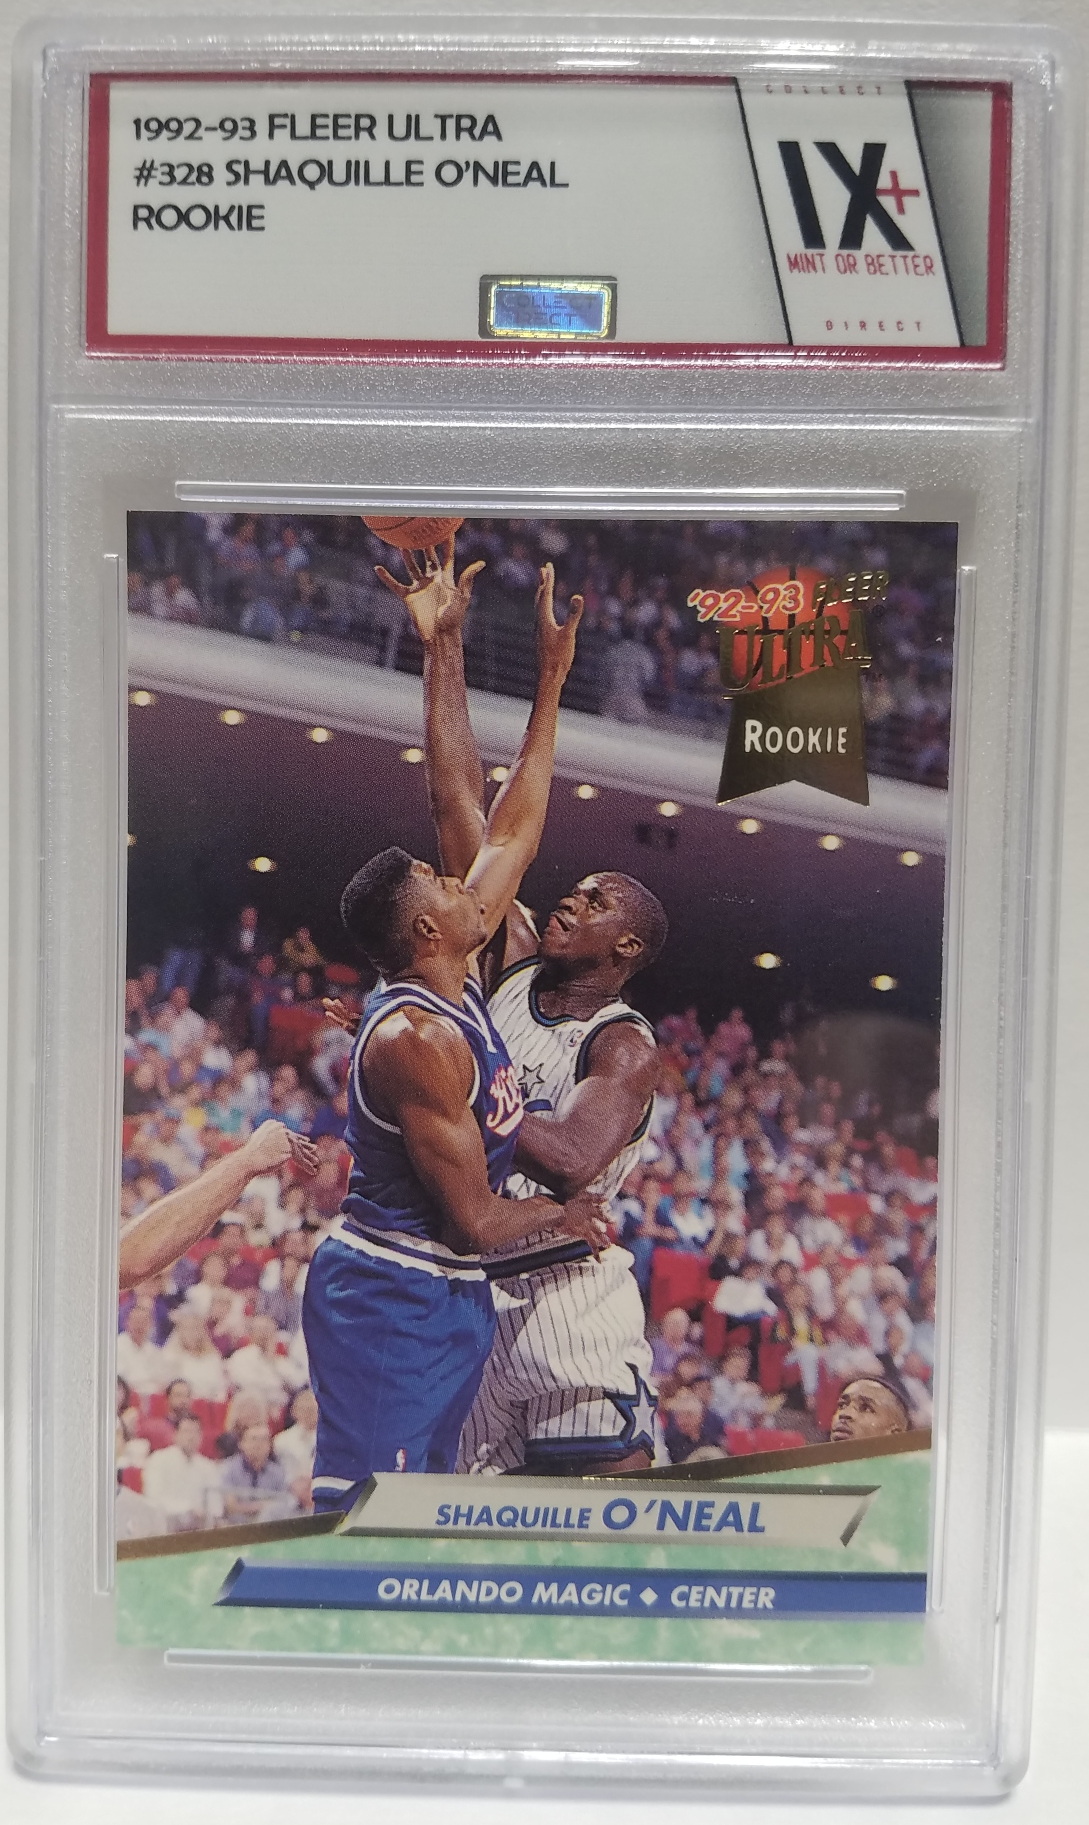 SHAQUILLE O'NEAL 1992-93 Fleer Untra Rookie Card #328 Collect Direct Graded Mint Or Better ORLANDO MAGIC 1st Card